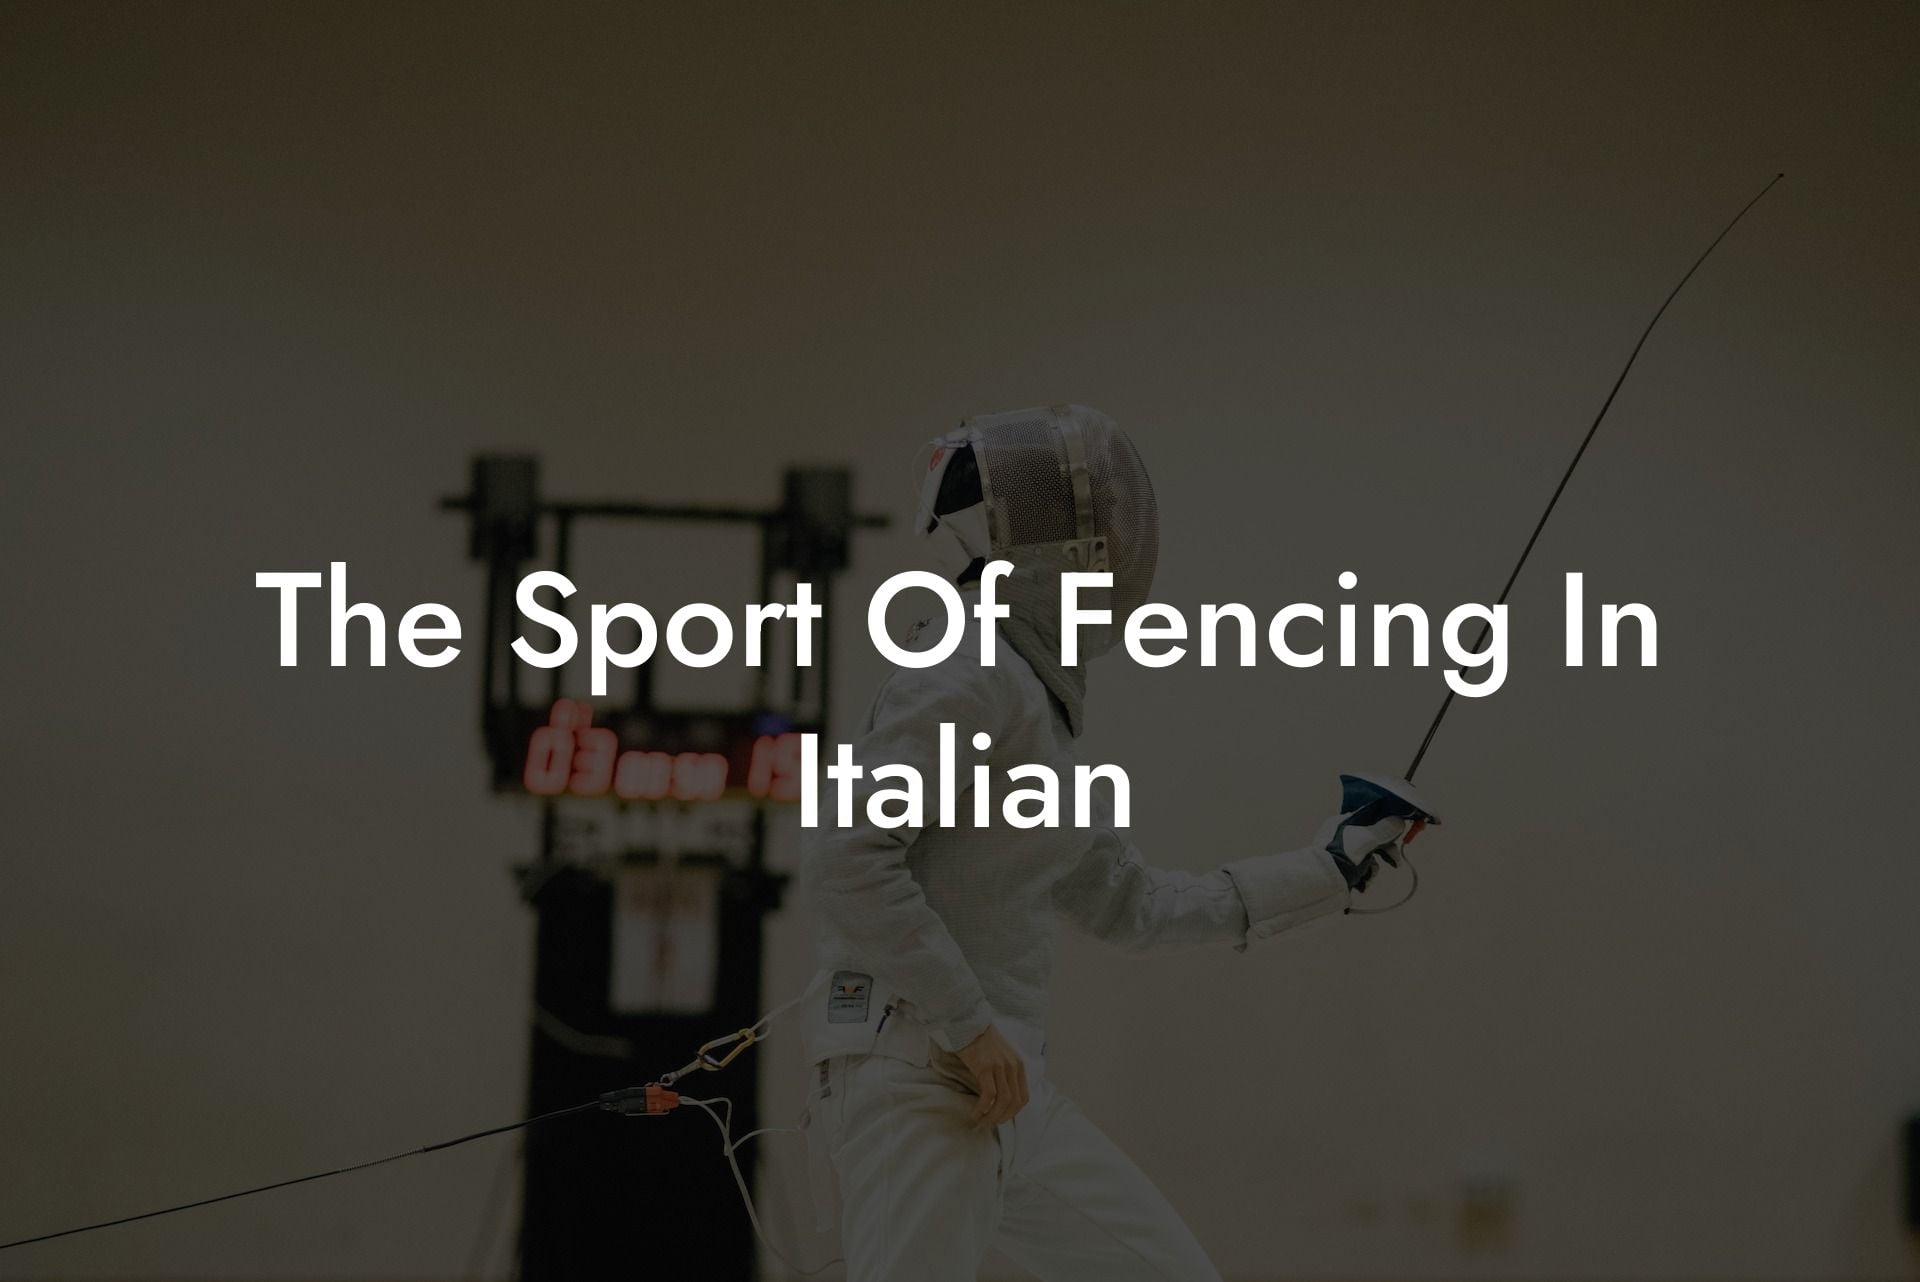 The Sport Of Fencing In Italian